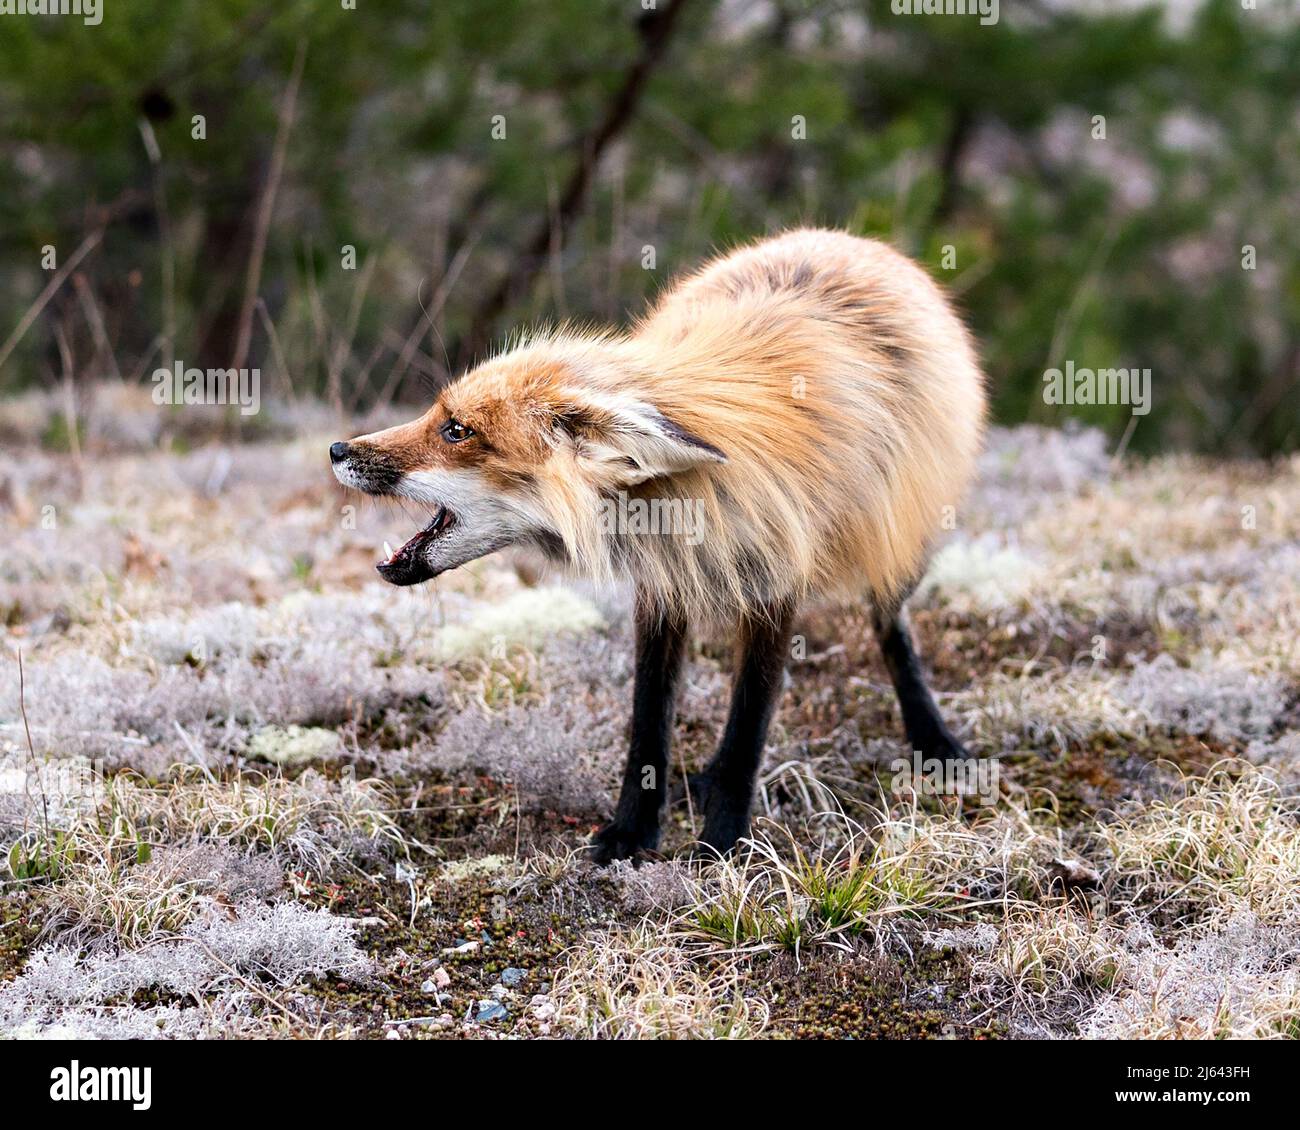 Red fox standing on white moss with a blur forest background in the spring season displaying open mouth, teeth, ears behind, with a mad look. Stock Photo